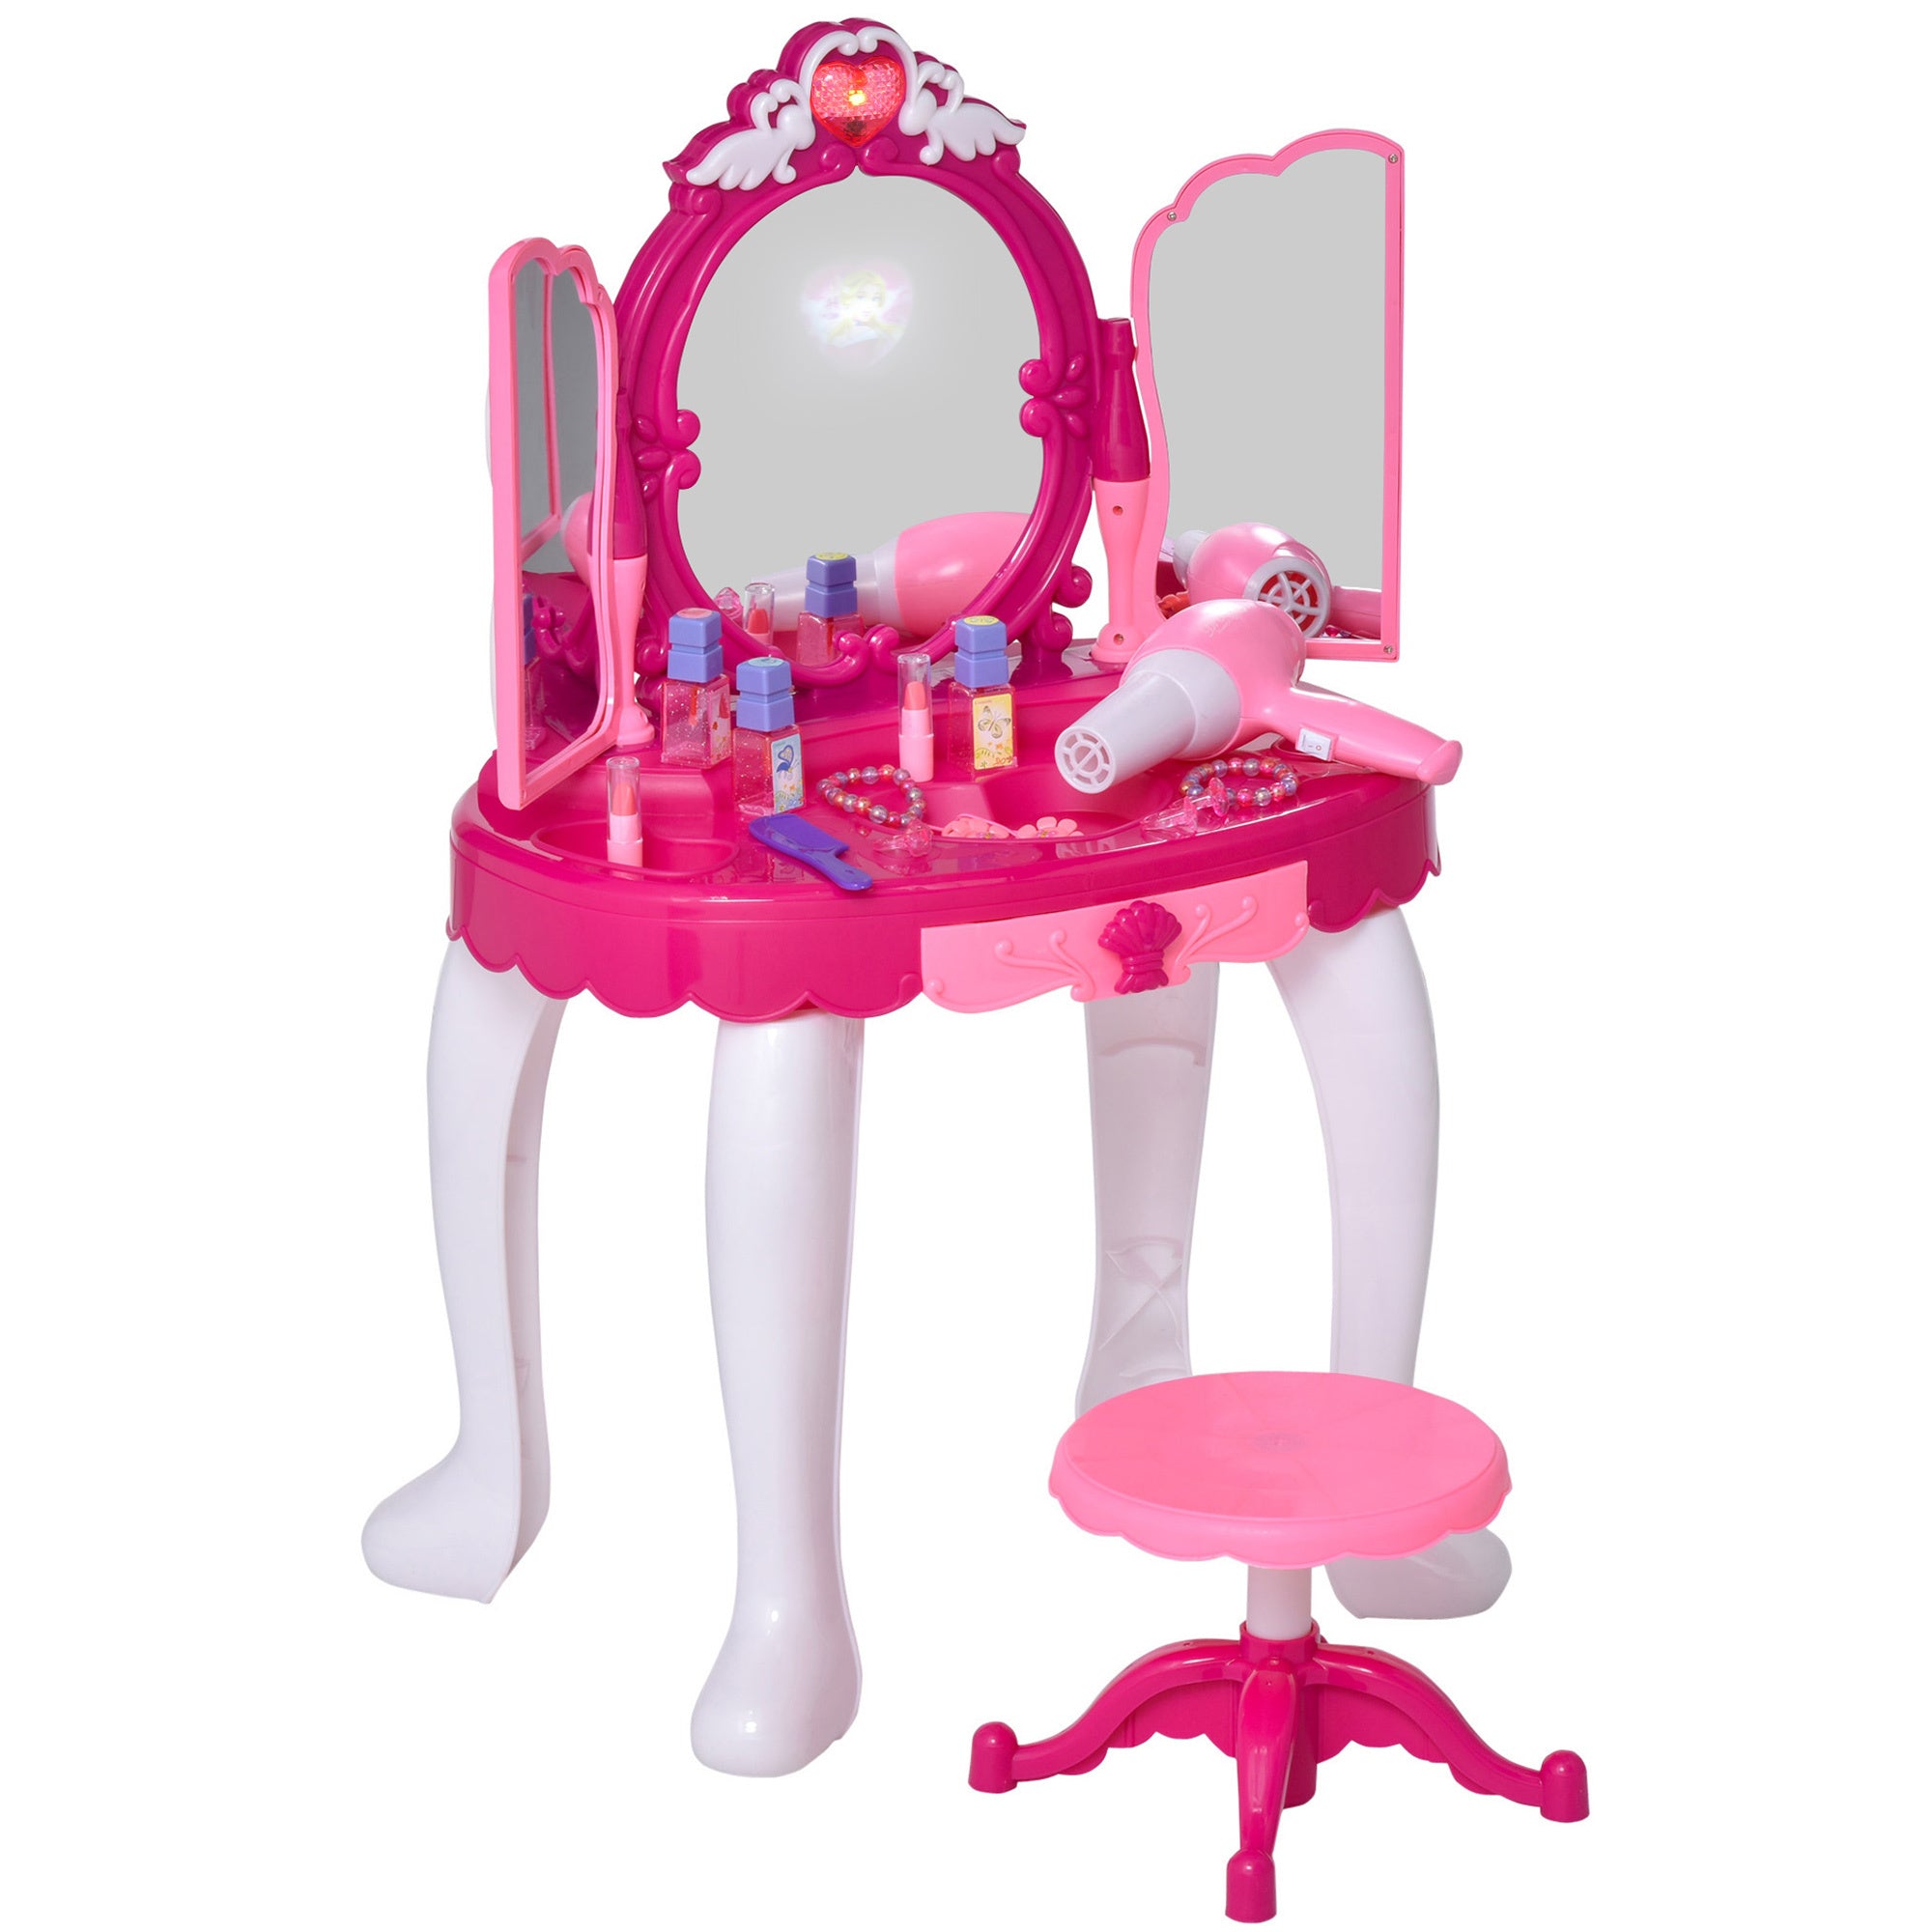 Infrared Remote Control Kids Vanity Set, Girls Pretend Dressing Table Set with Magic Wand, Music, Lightening, Cosmetic Mirror, Hair Dryer and Makeup Accessories